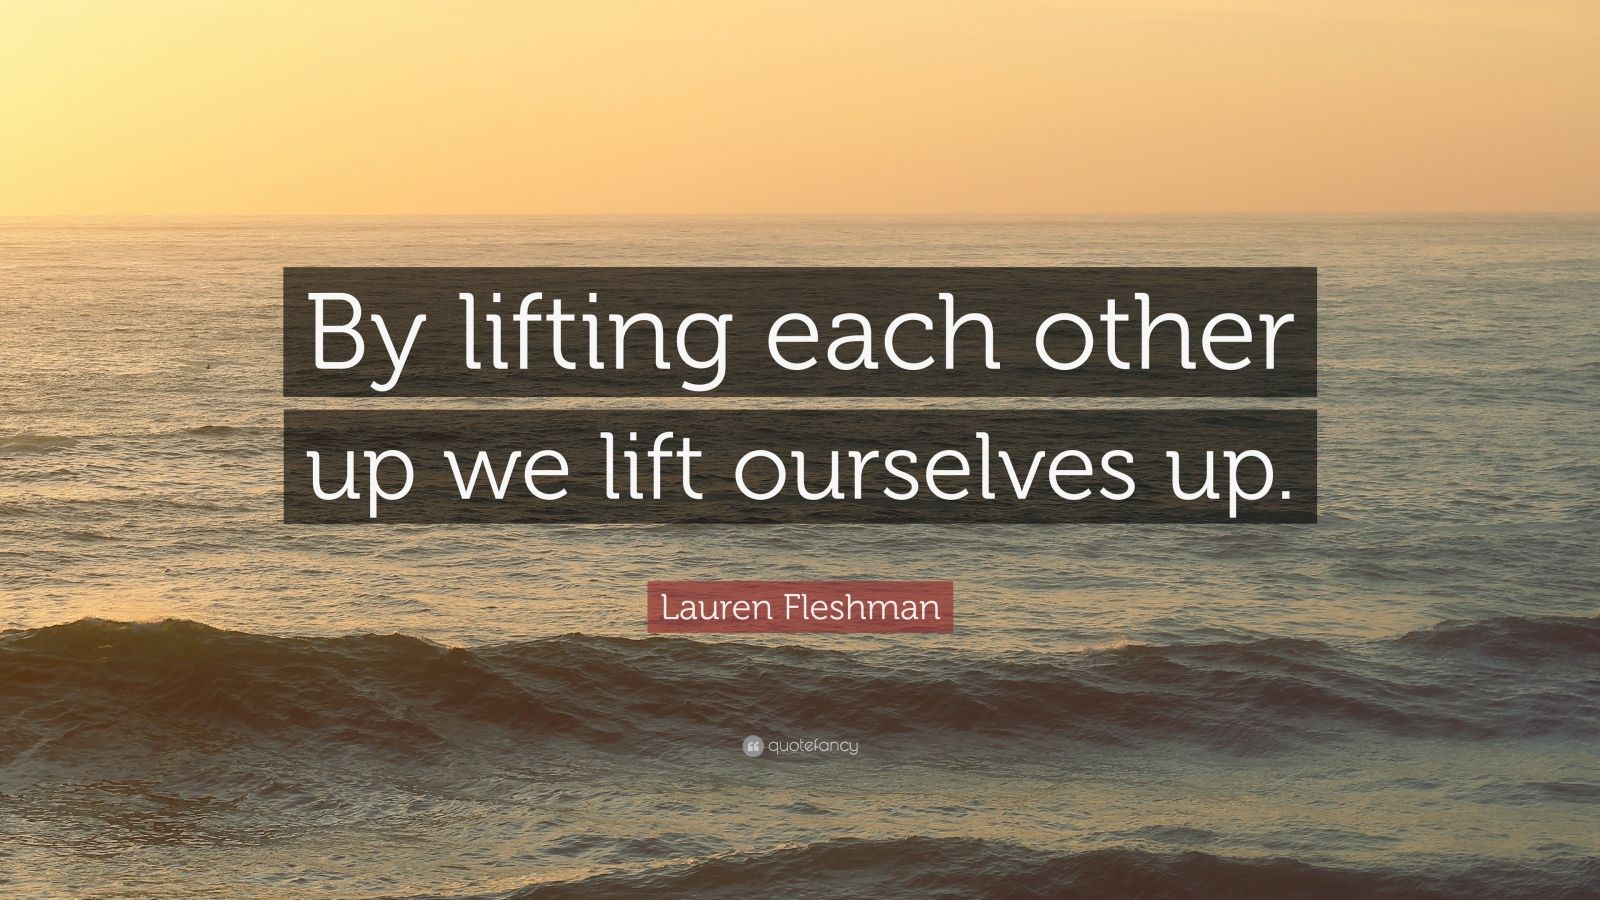 1890906 Lauren Fleshman Quote By lifting each other up we lift ourselves